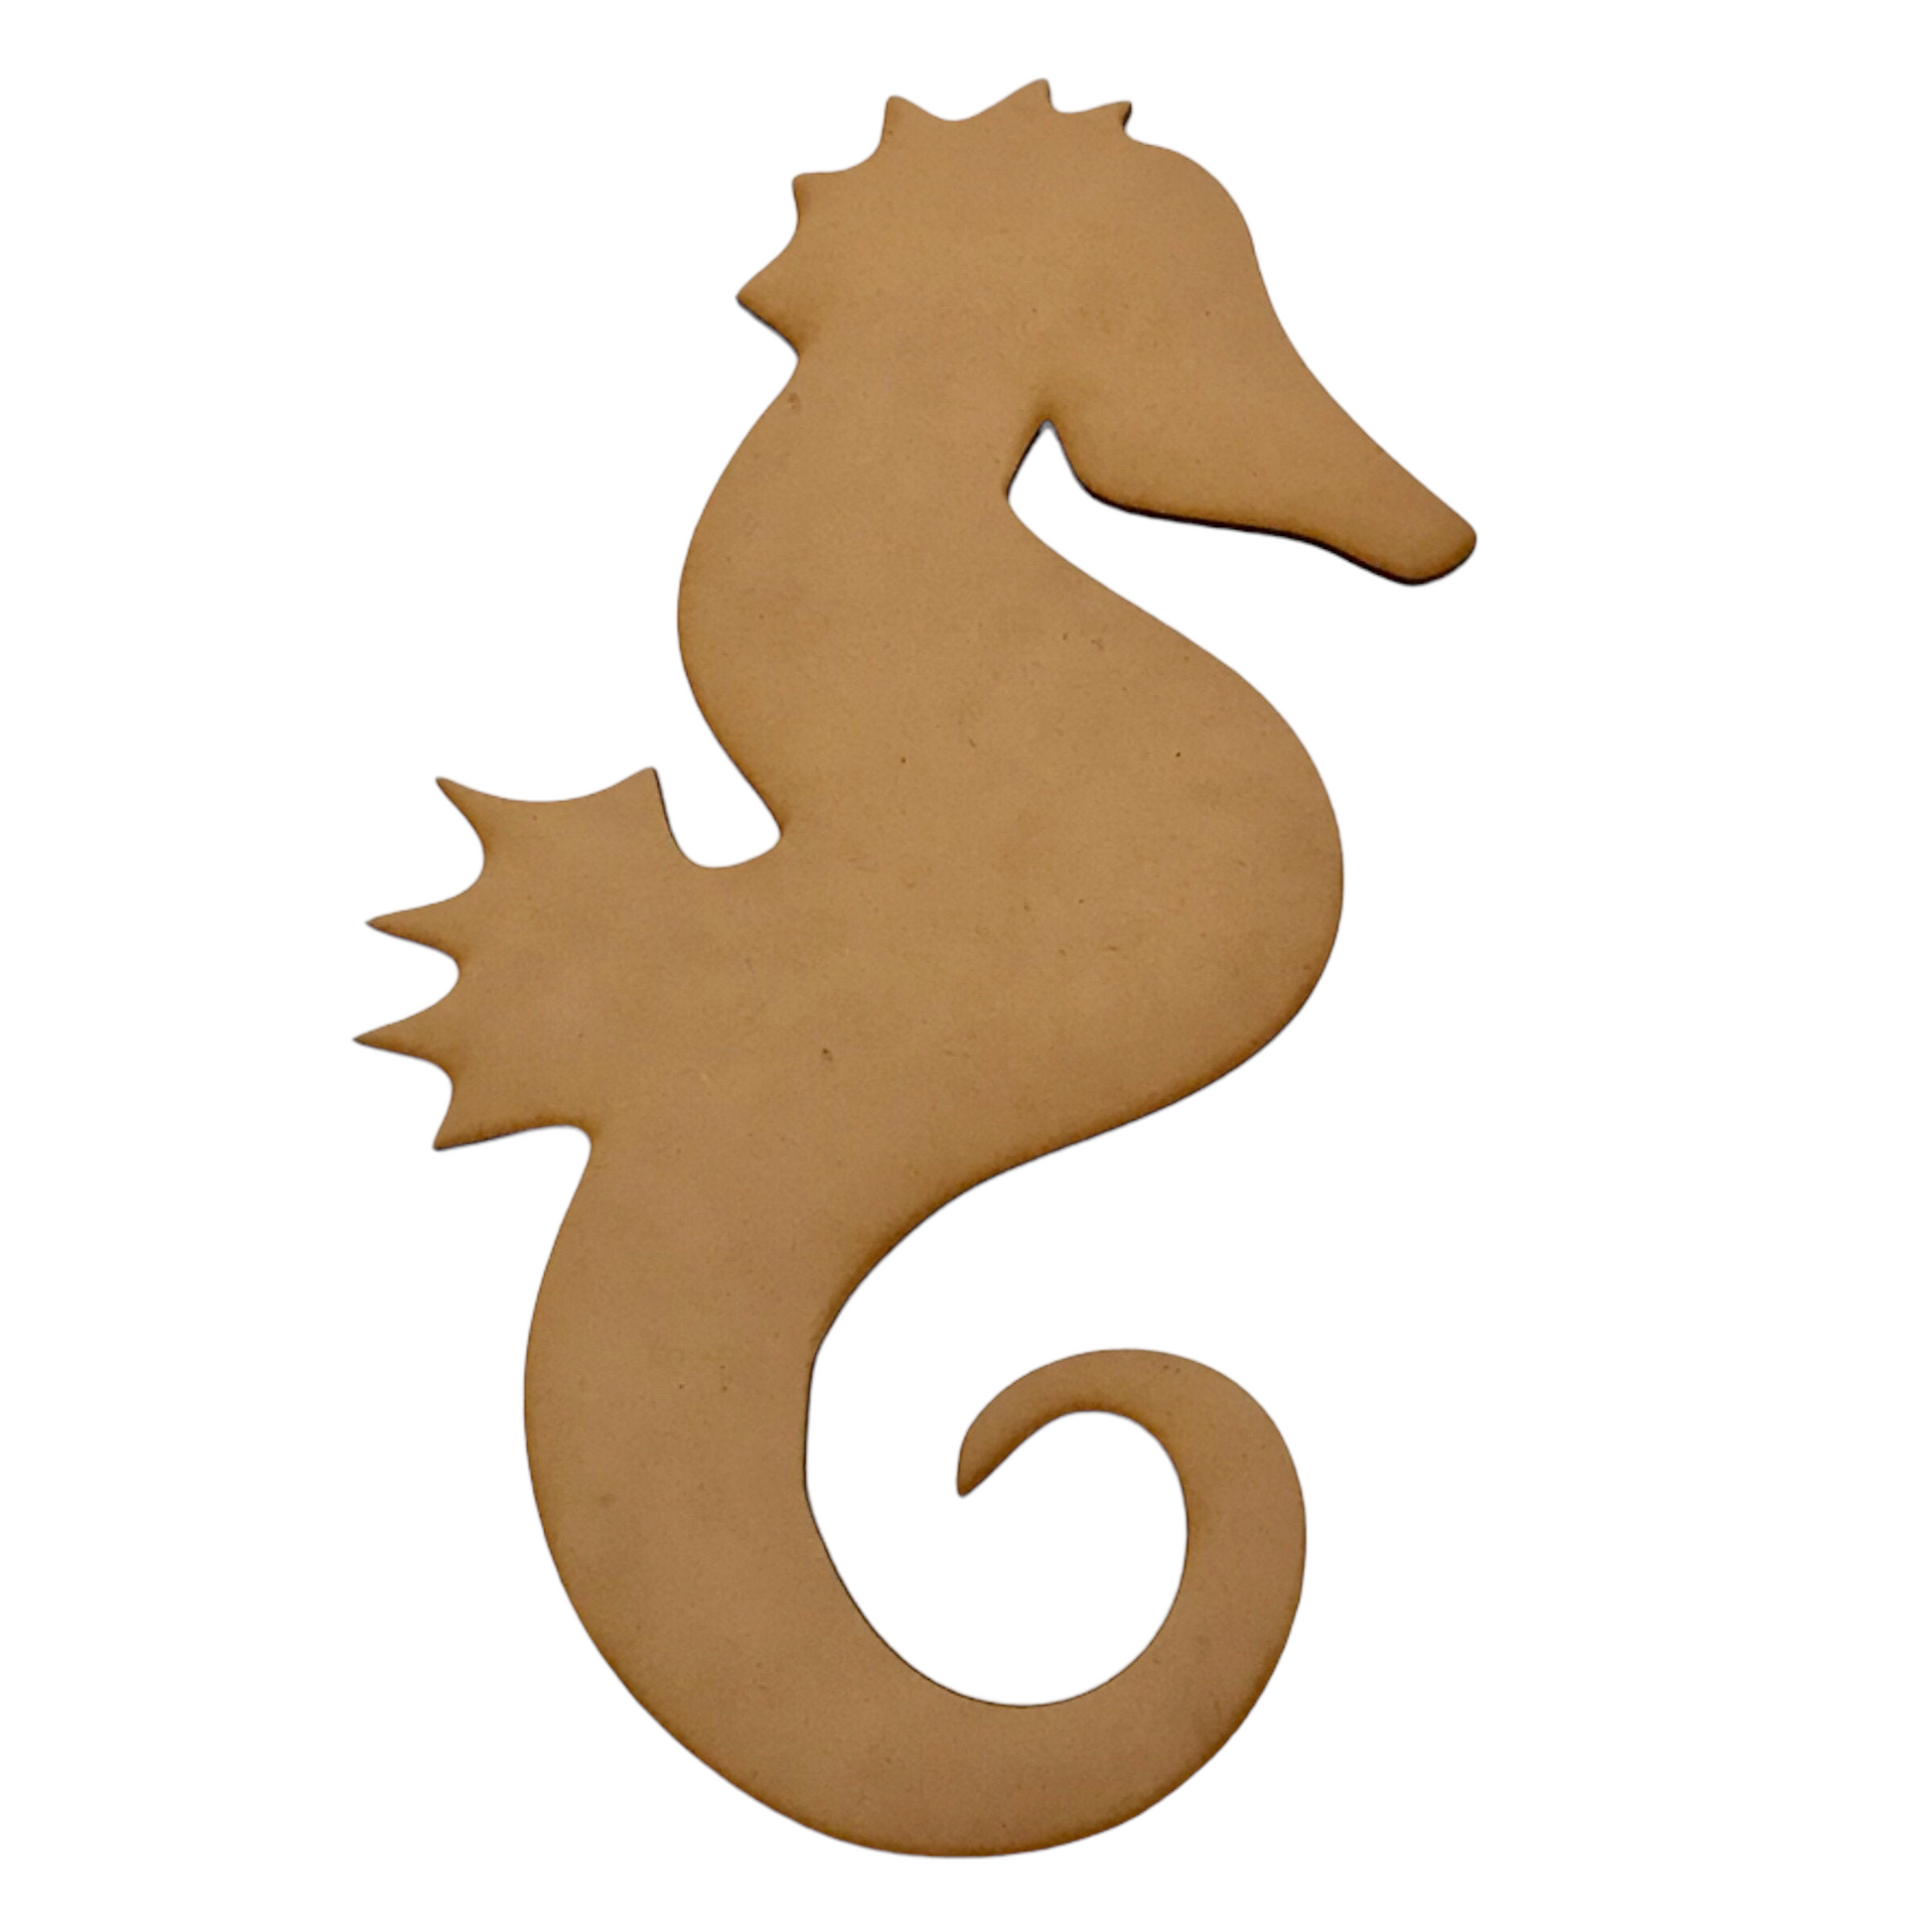 Sea Horse Ocean Beach House Wooden Raw MDF DIY Craft - The Renmy Store Homewares & Gifts 